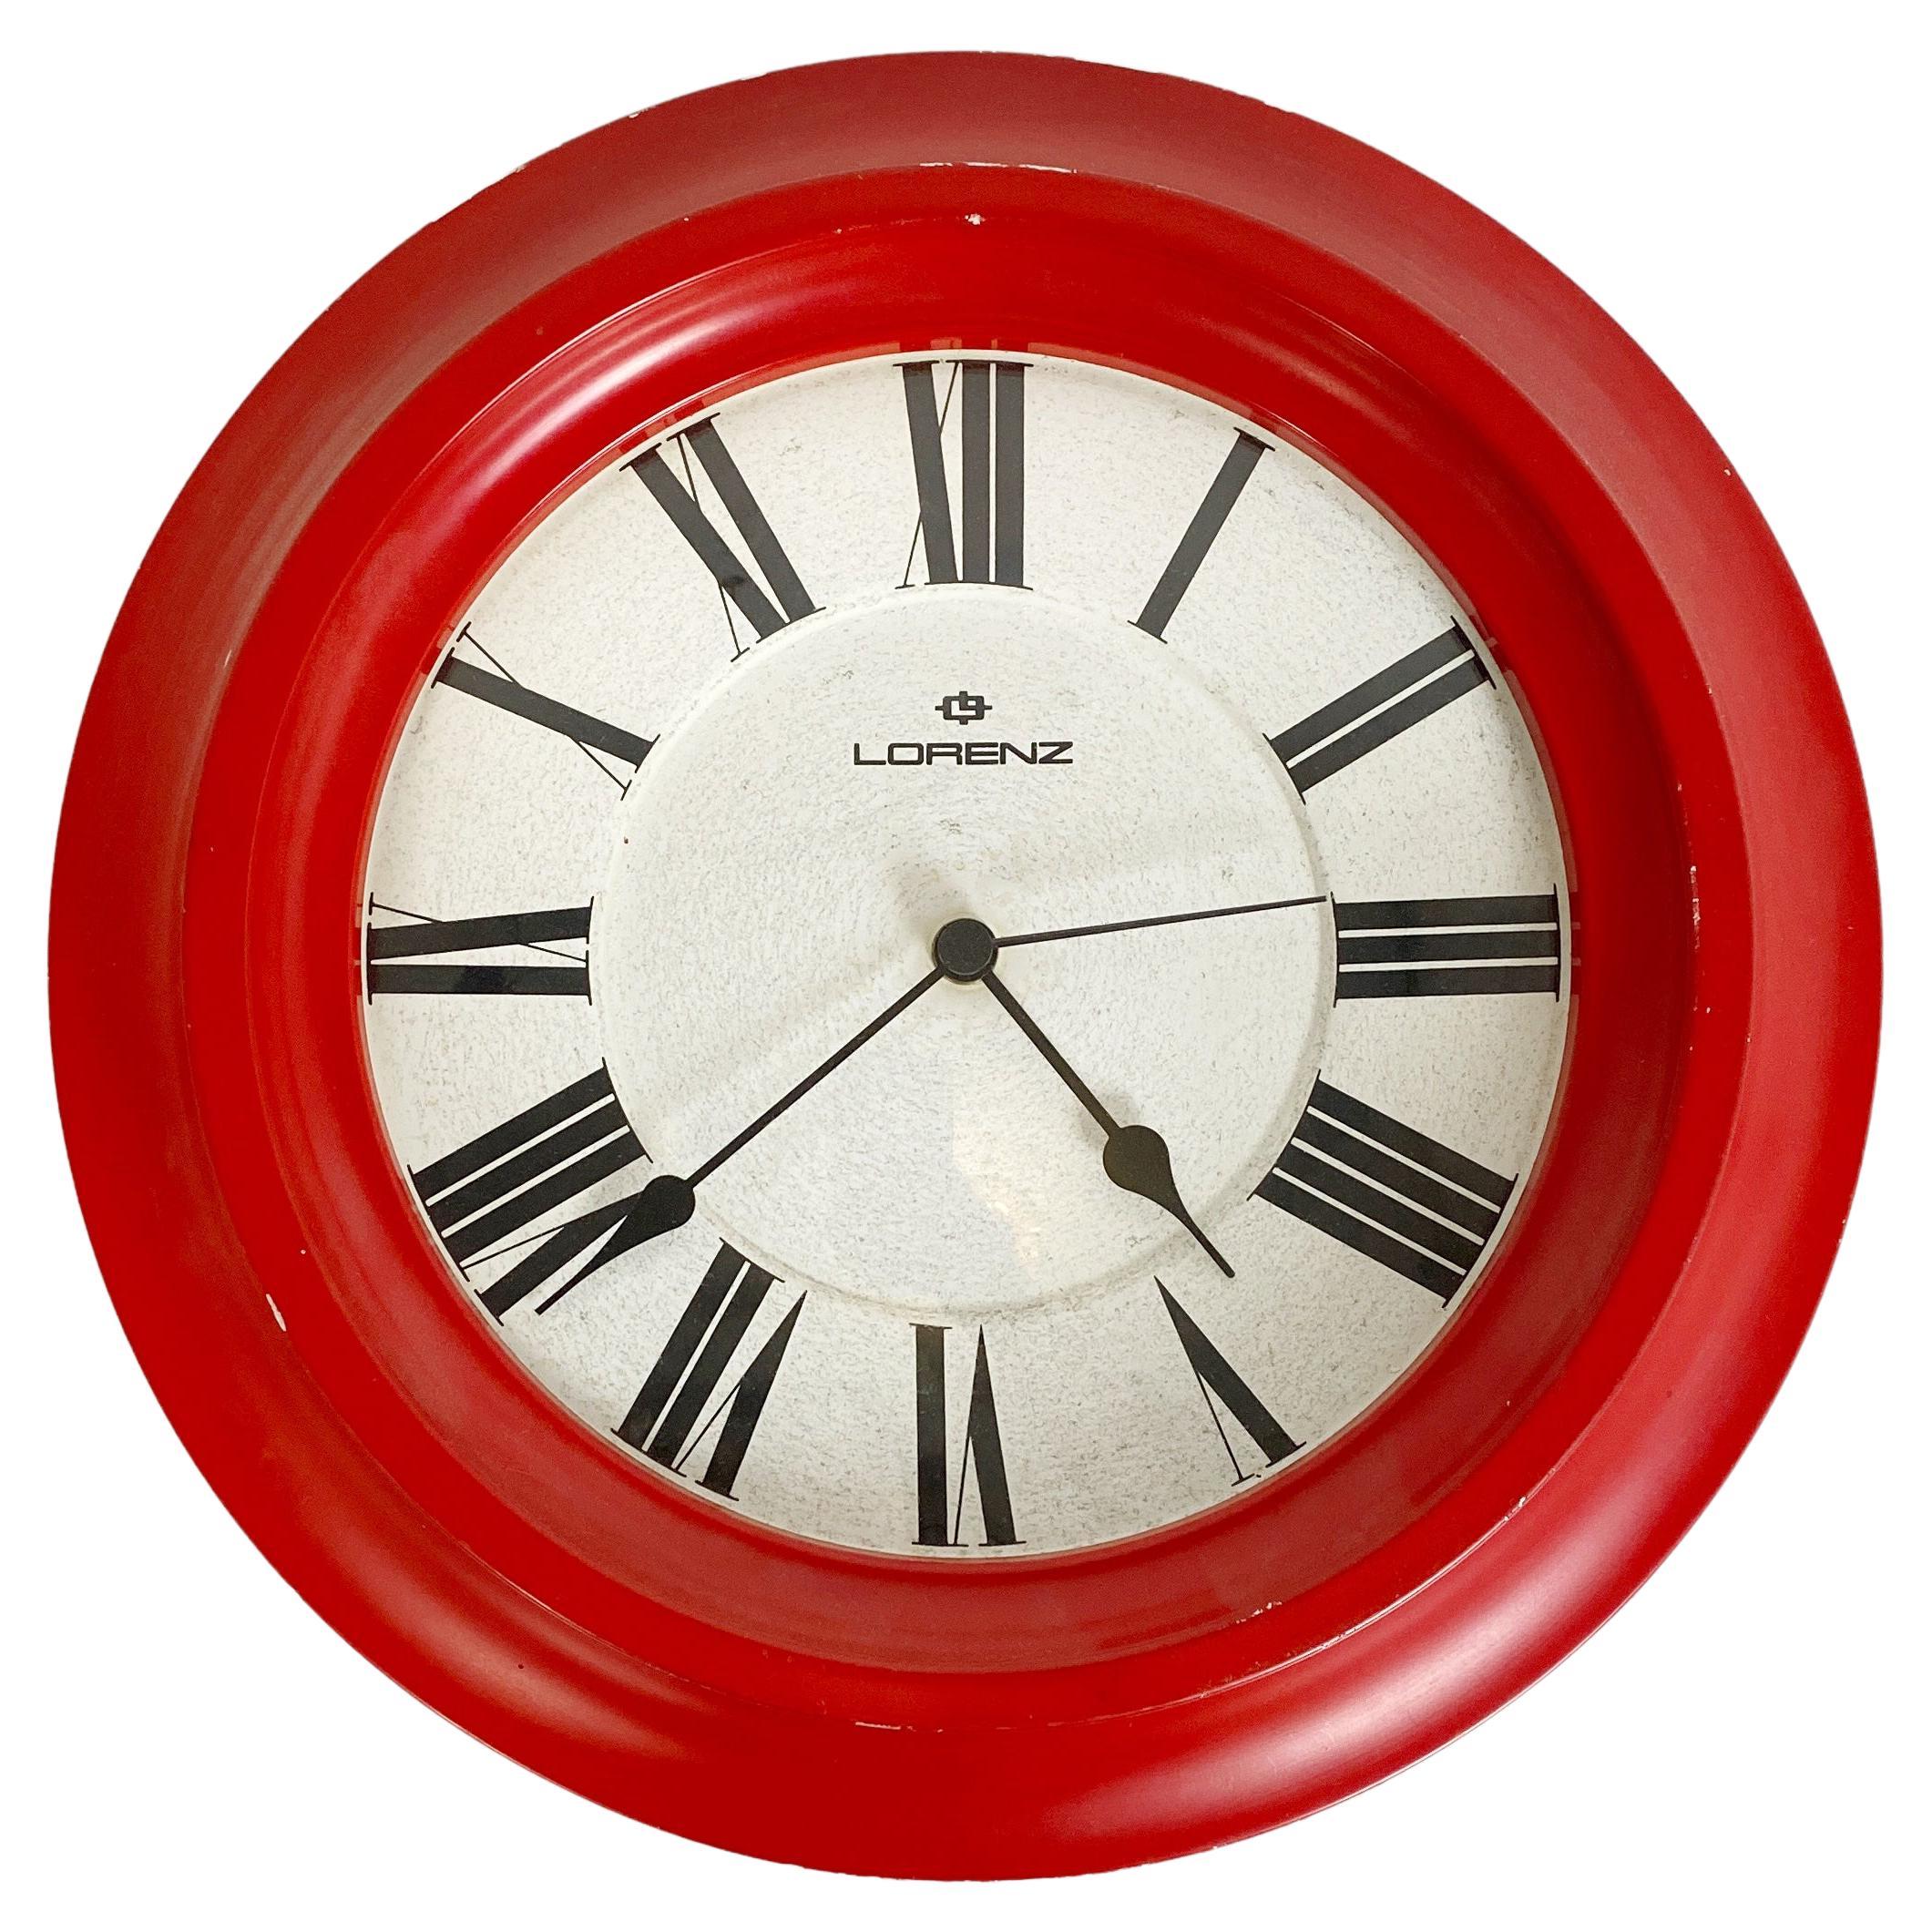 Italian Mid-Century Modern Round Red Wall Clock by Lorenz, 1970s For Sale